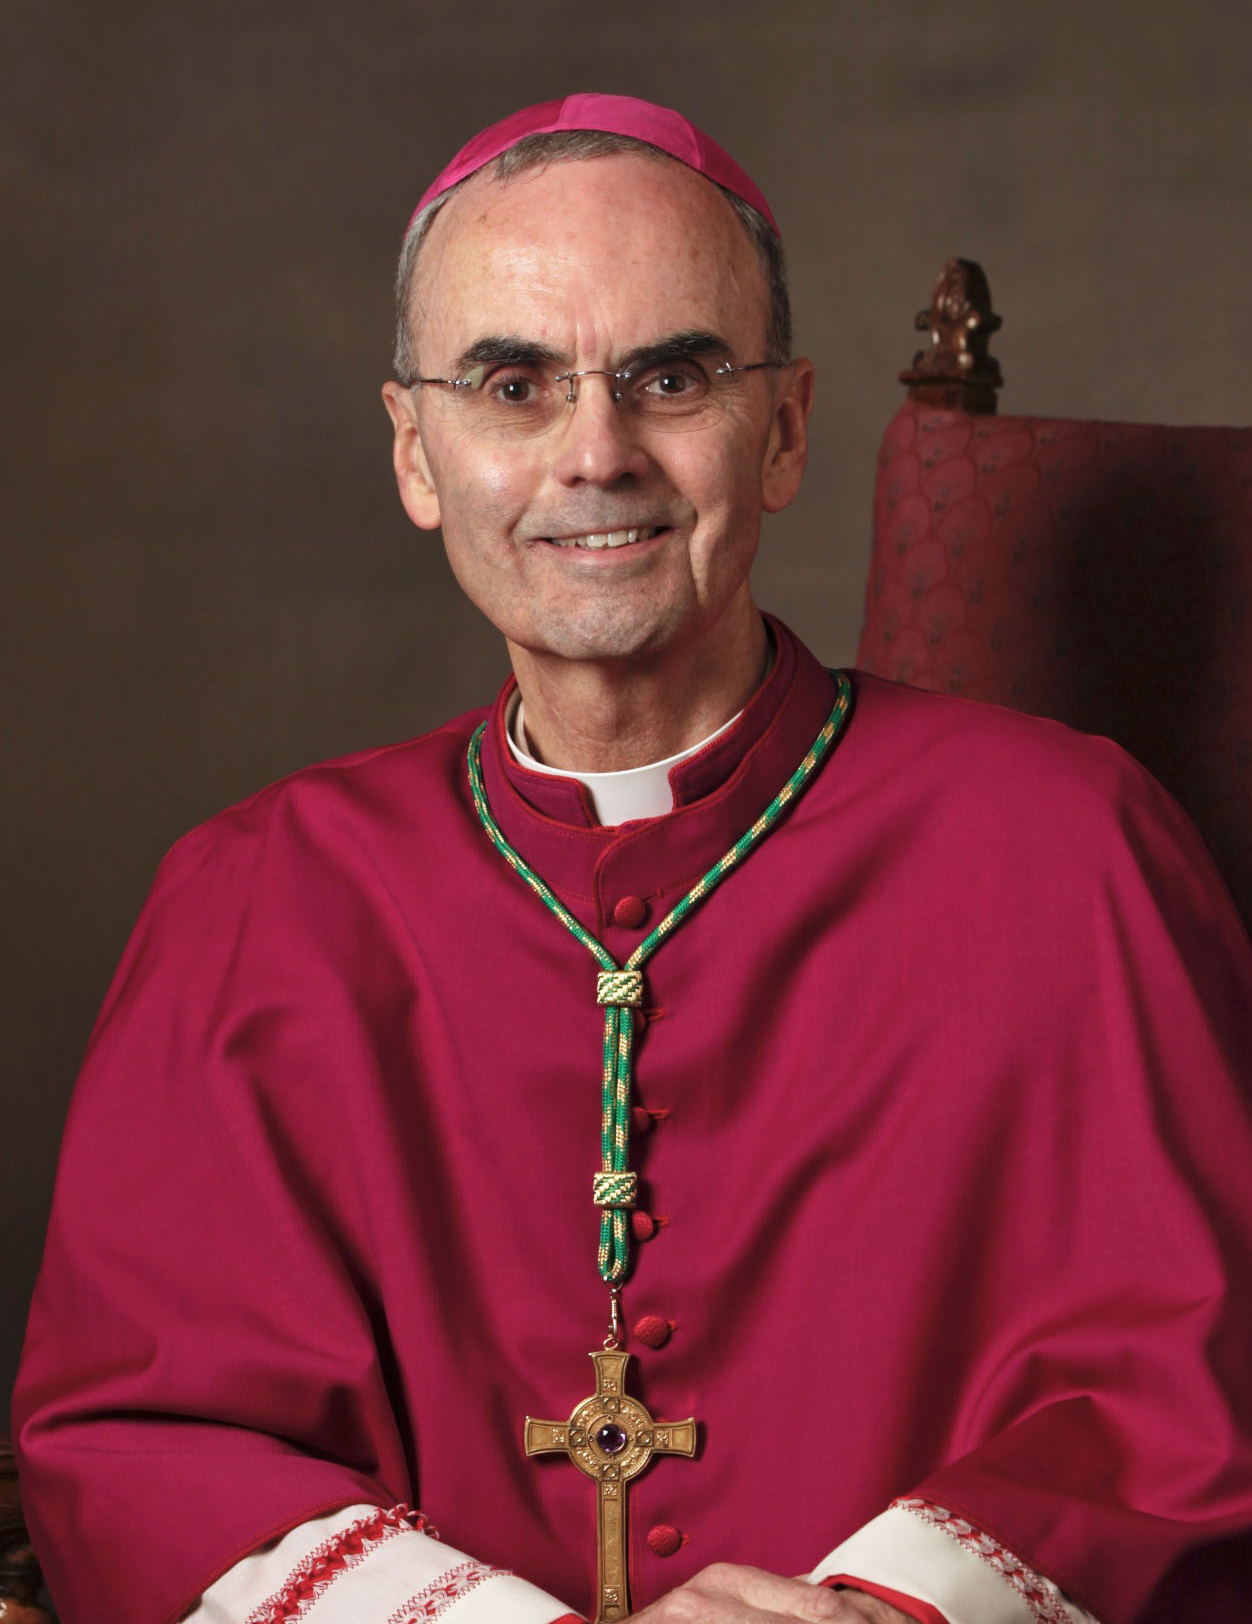 A priest in a red robe sitting in a chair.